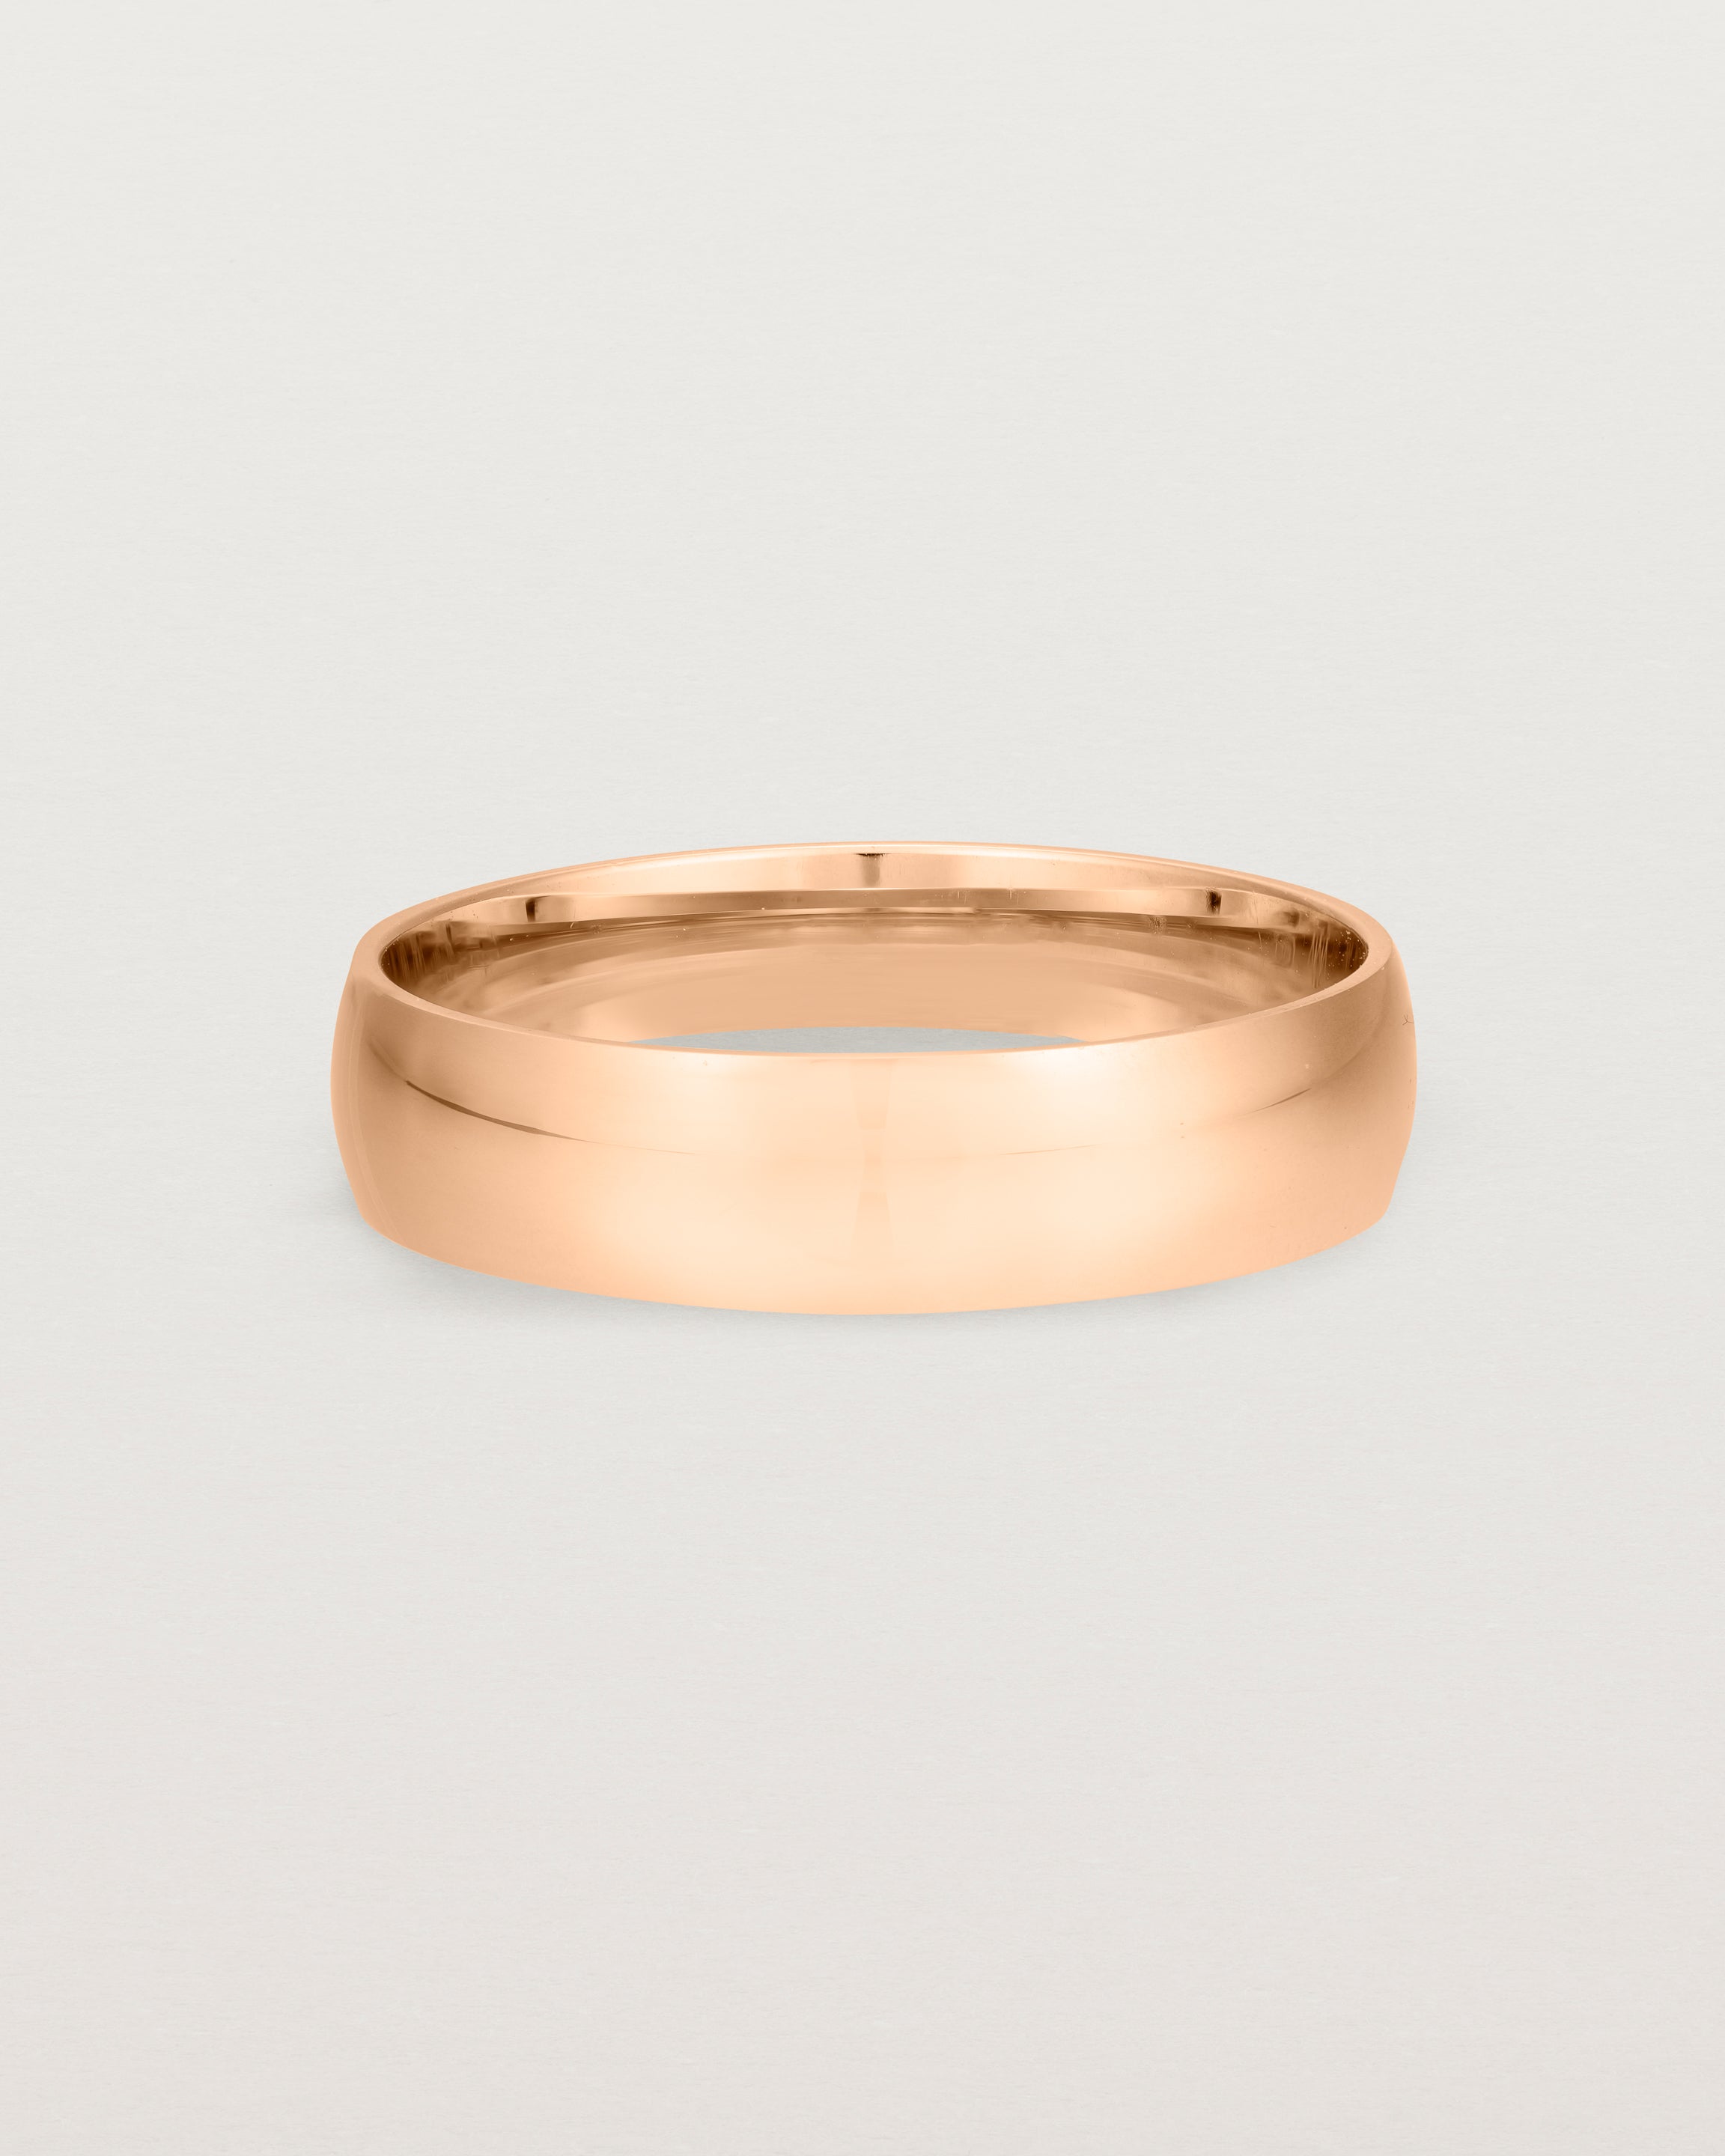 A 5mm wedding band, our most popular width, crafted in rose gold.